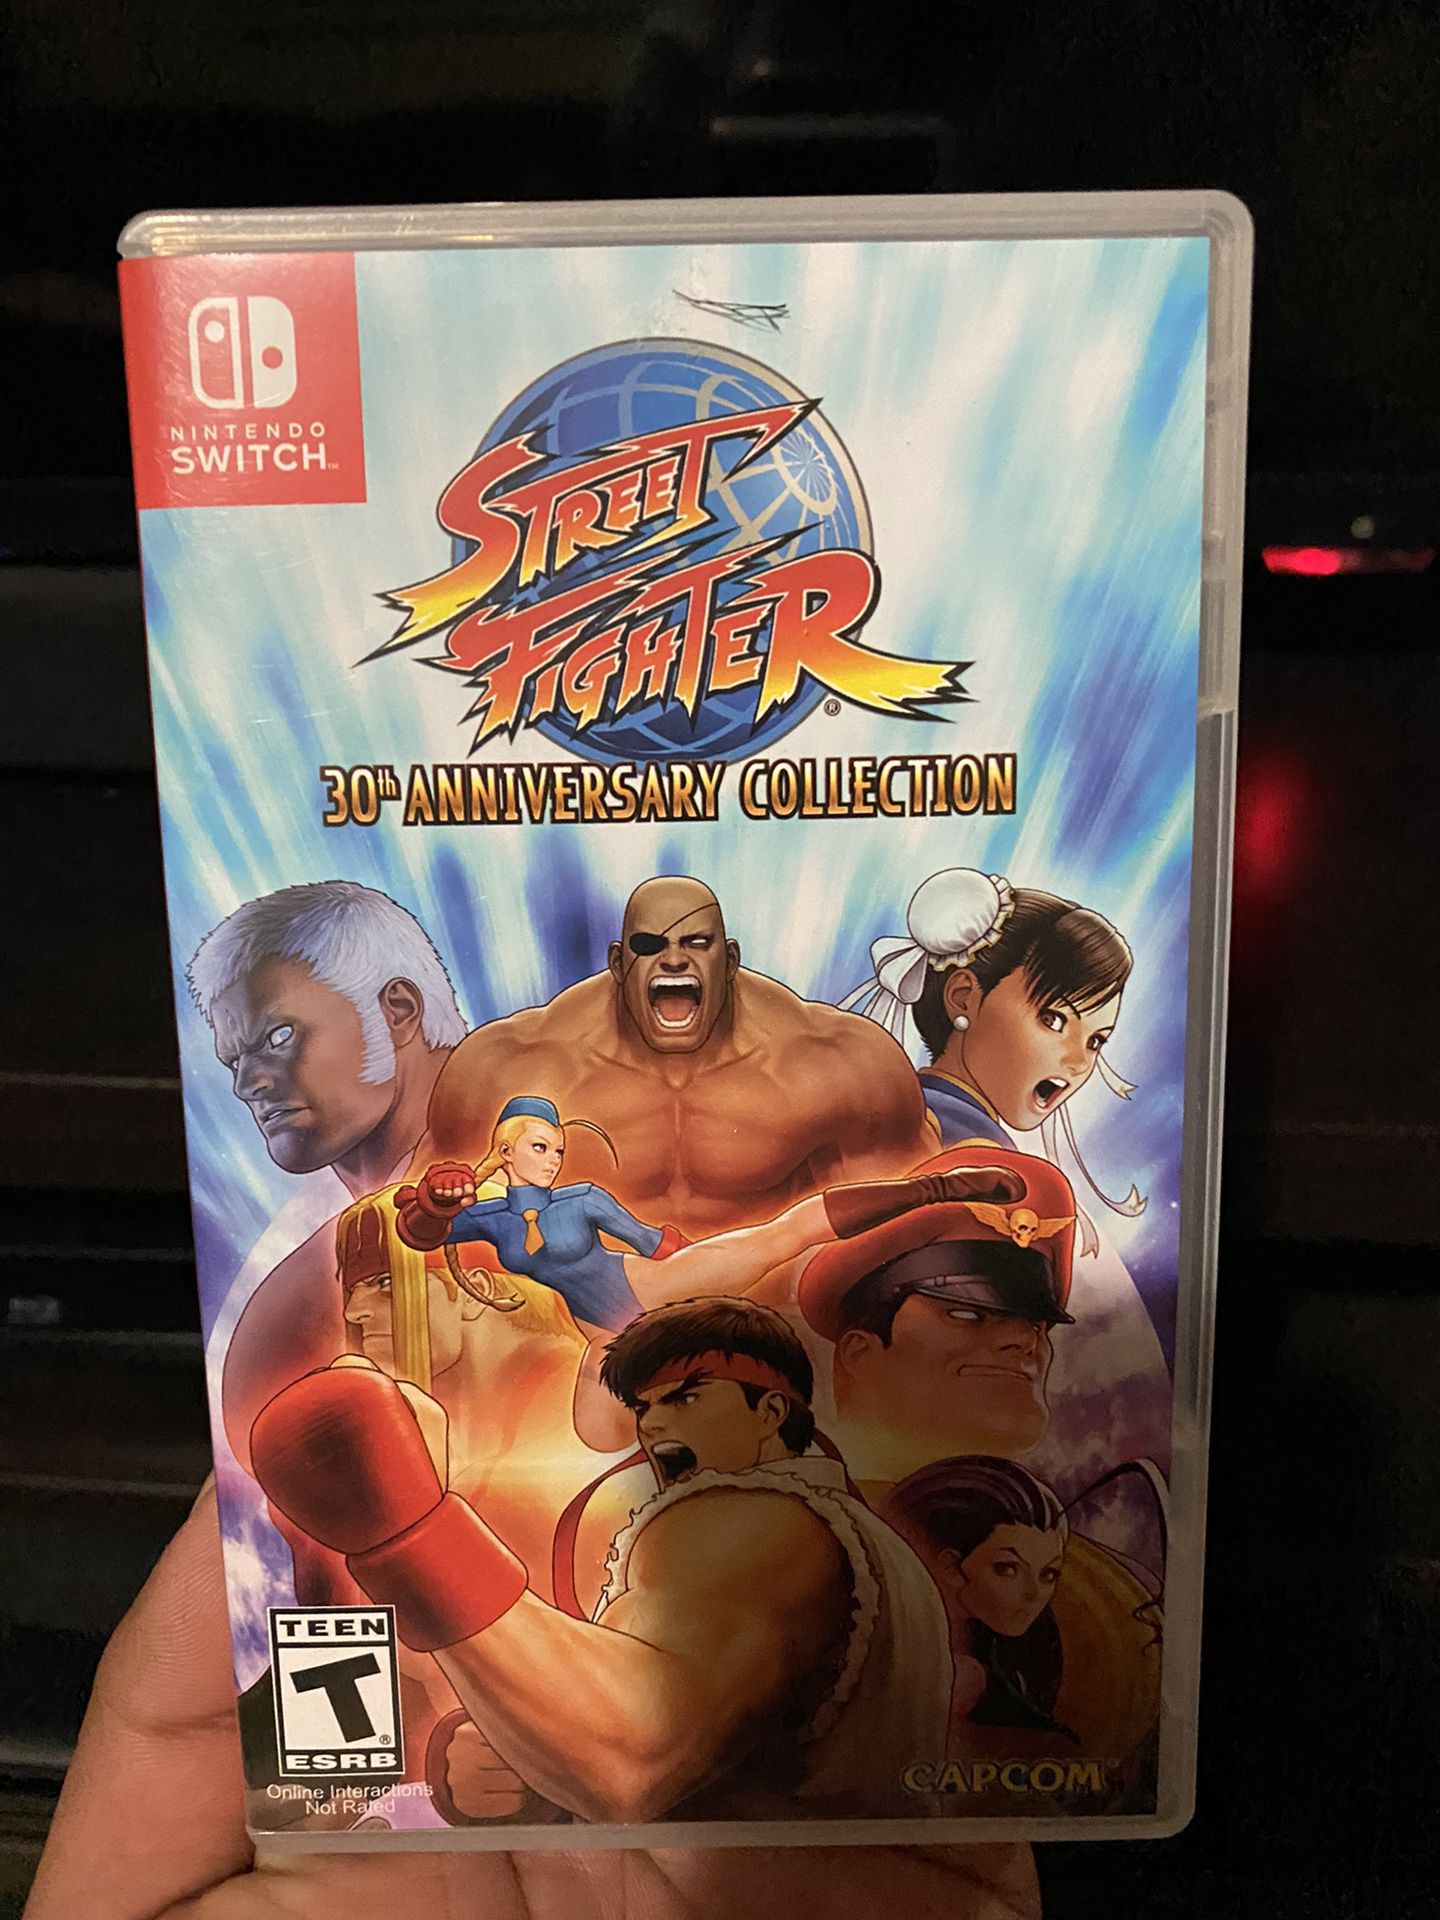 Street fighter for Nintendo switch